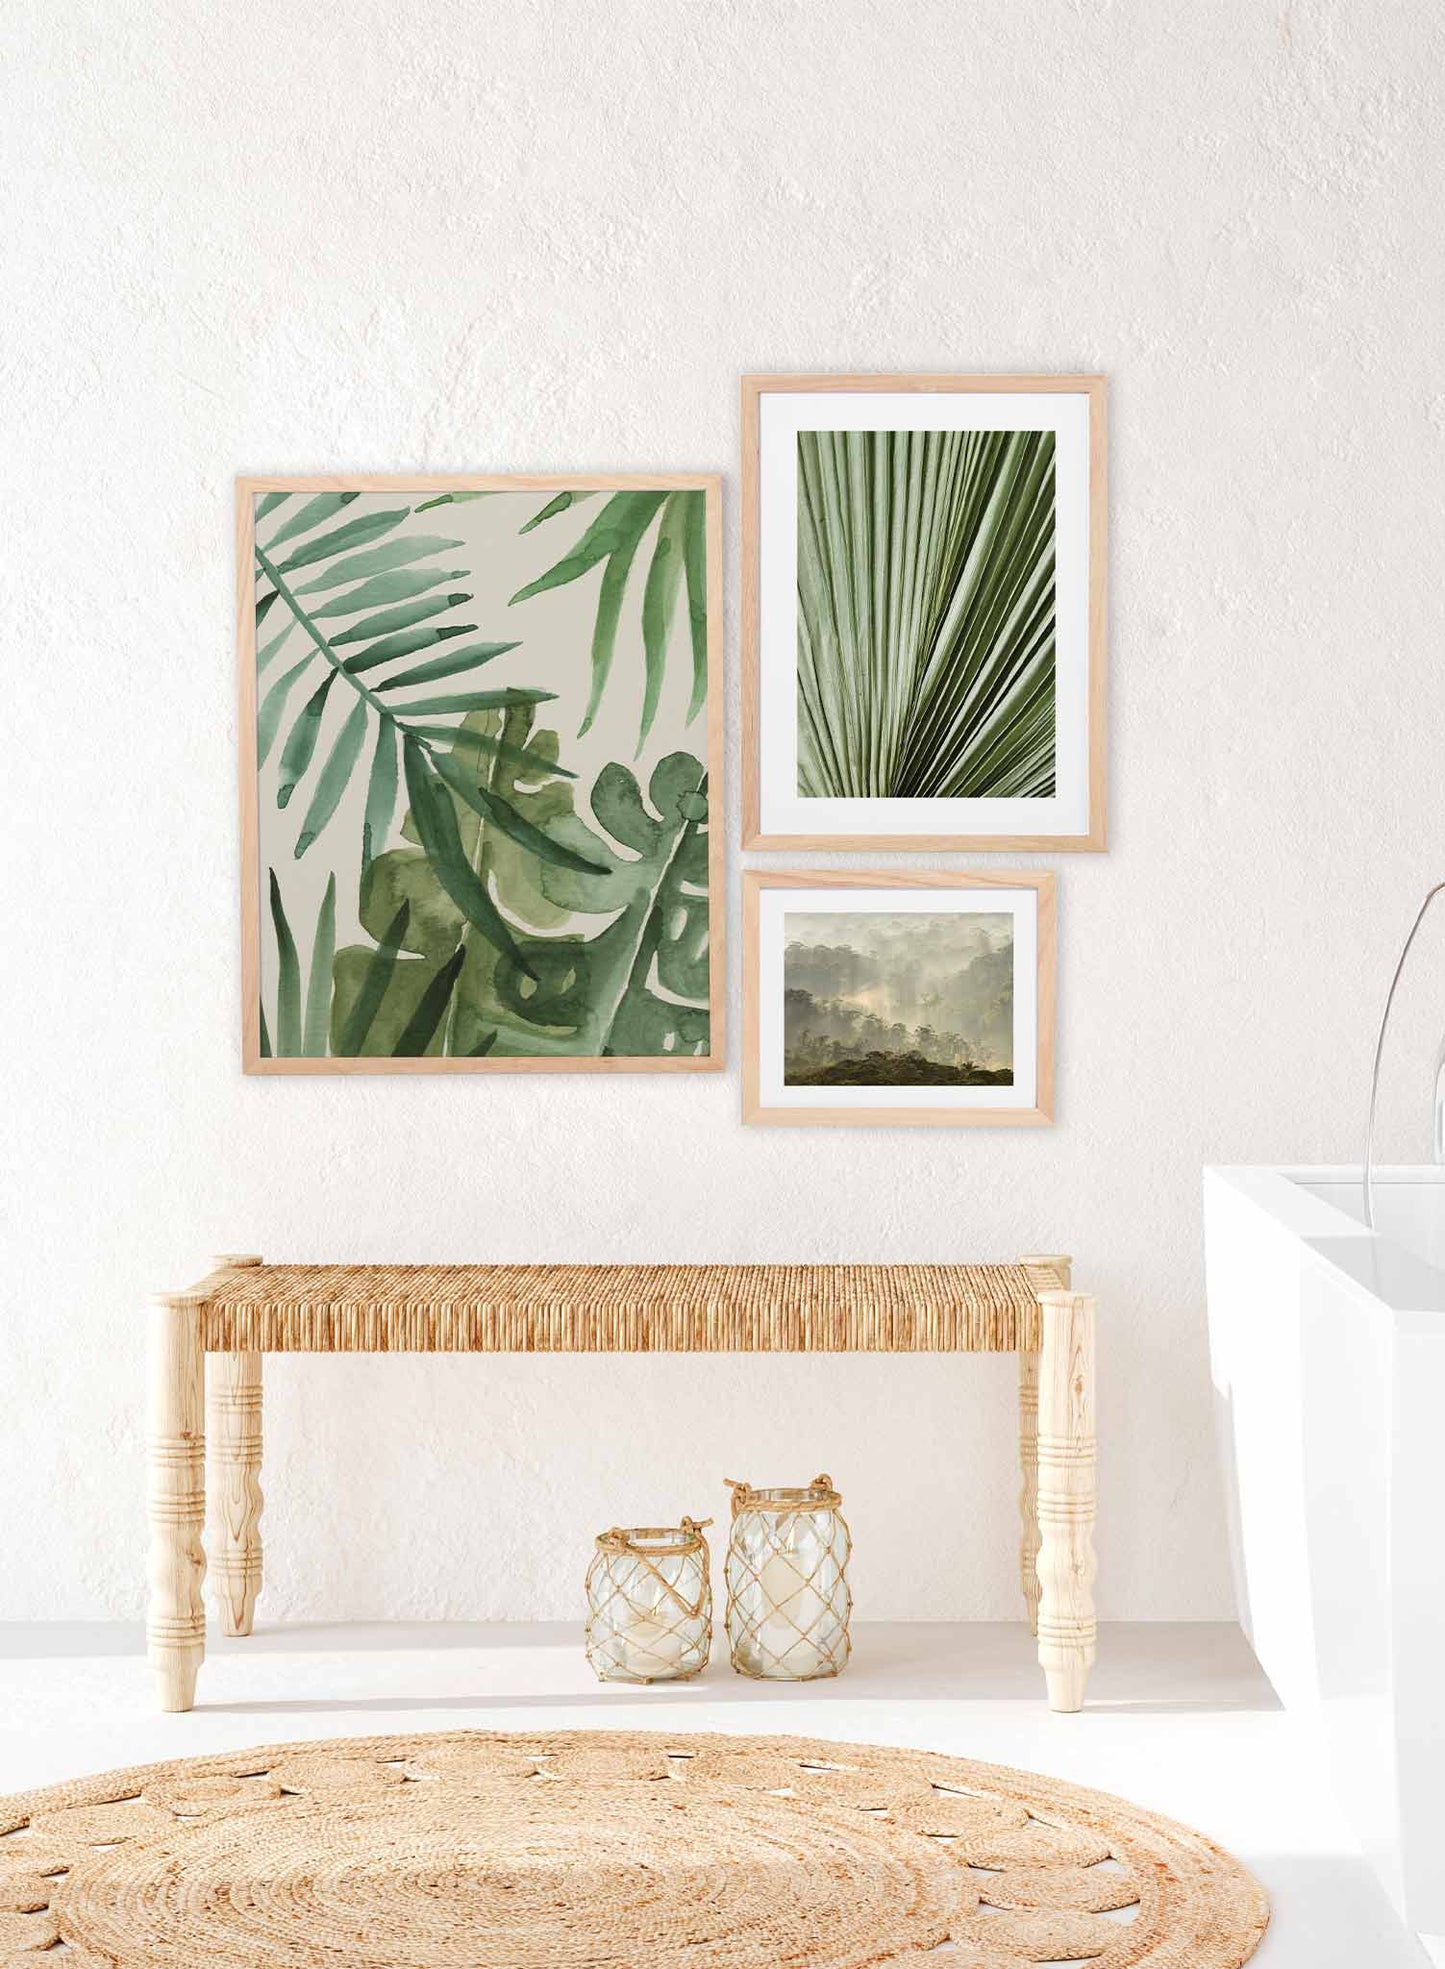 Watercolour Jungle is a minimalist illustration of leaves of various plants that can be found in the jungle drawn by watercolour by Opposite Wall.